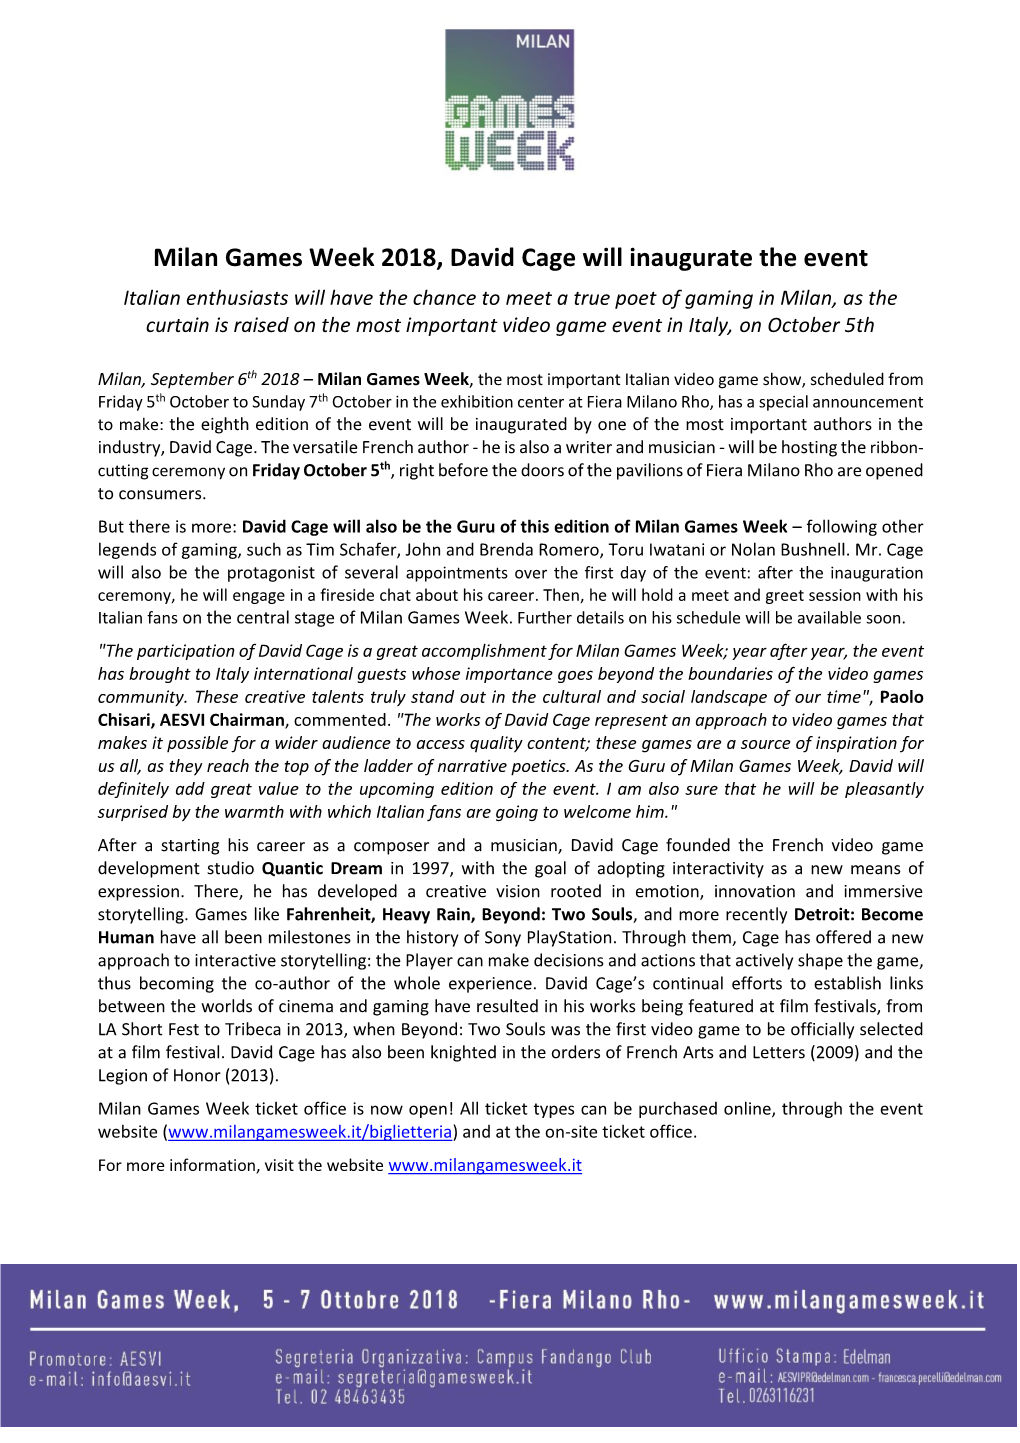 Milan Games Week 2018, David Cage Will Inaugurate the Event